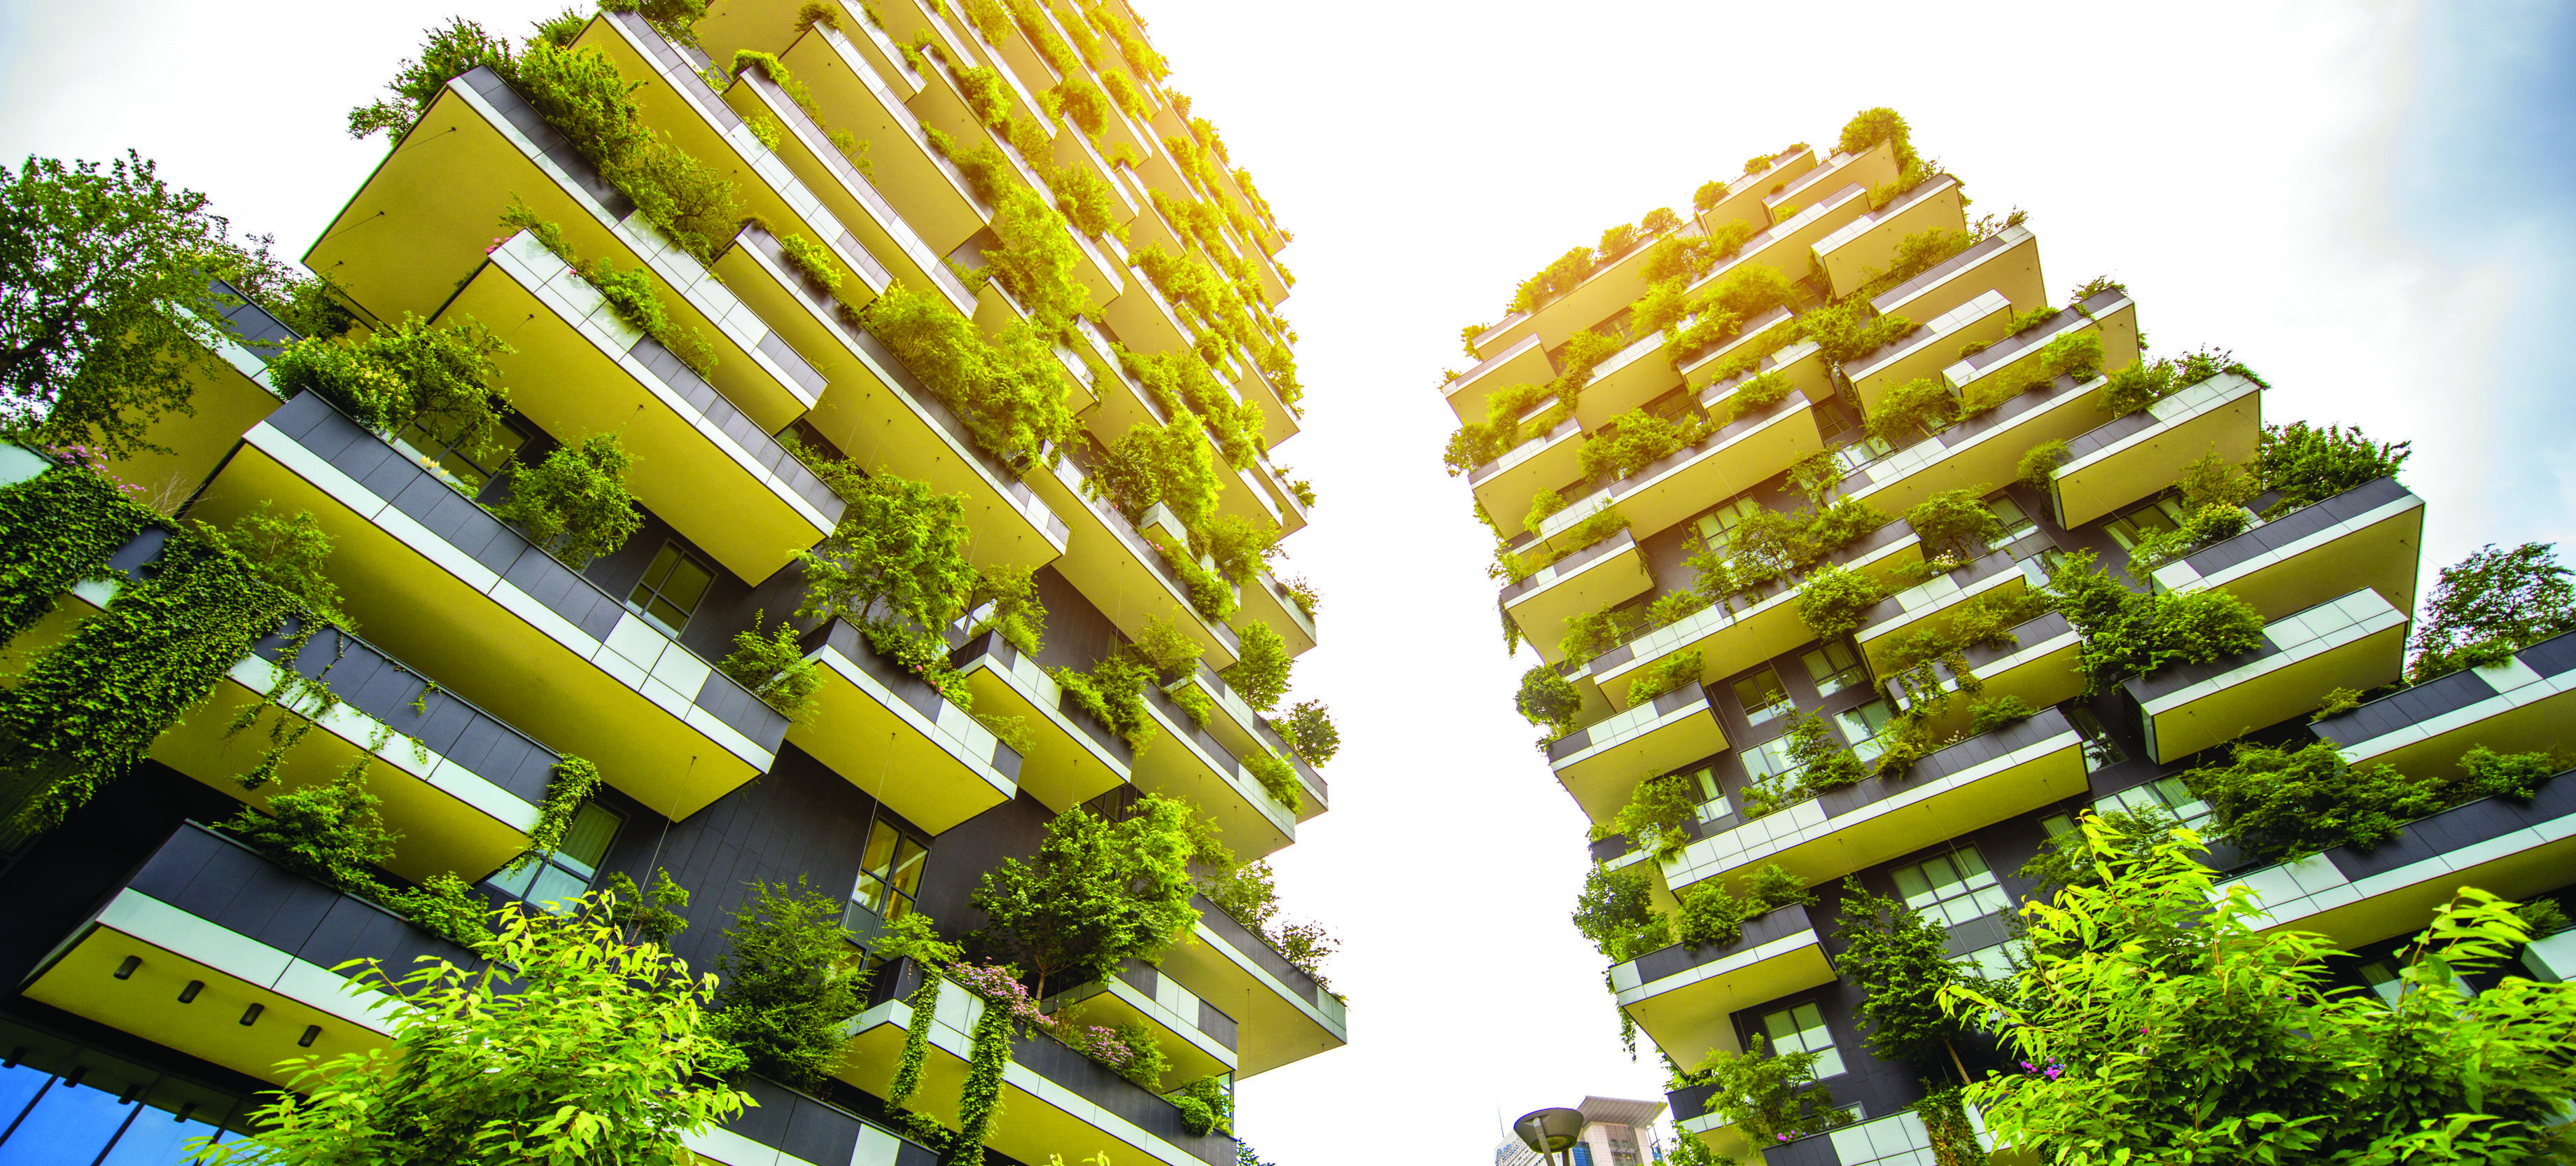 vertical forests